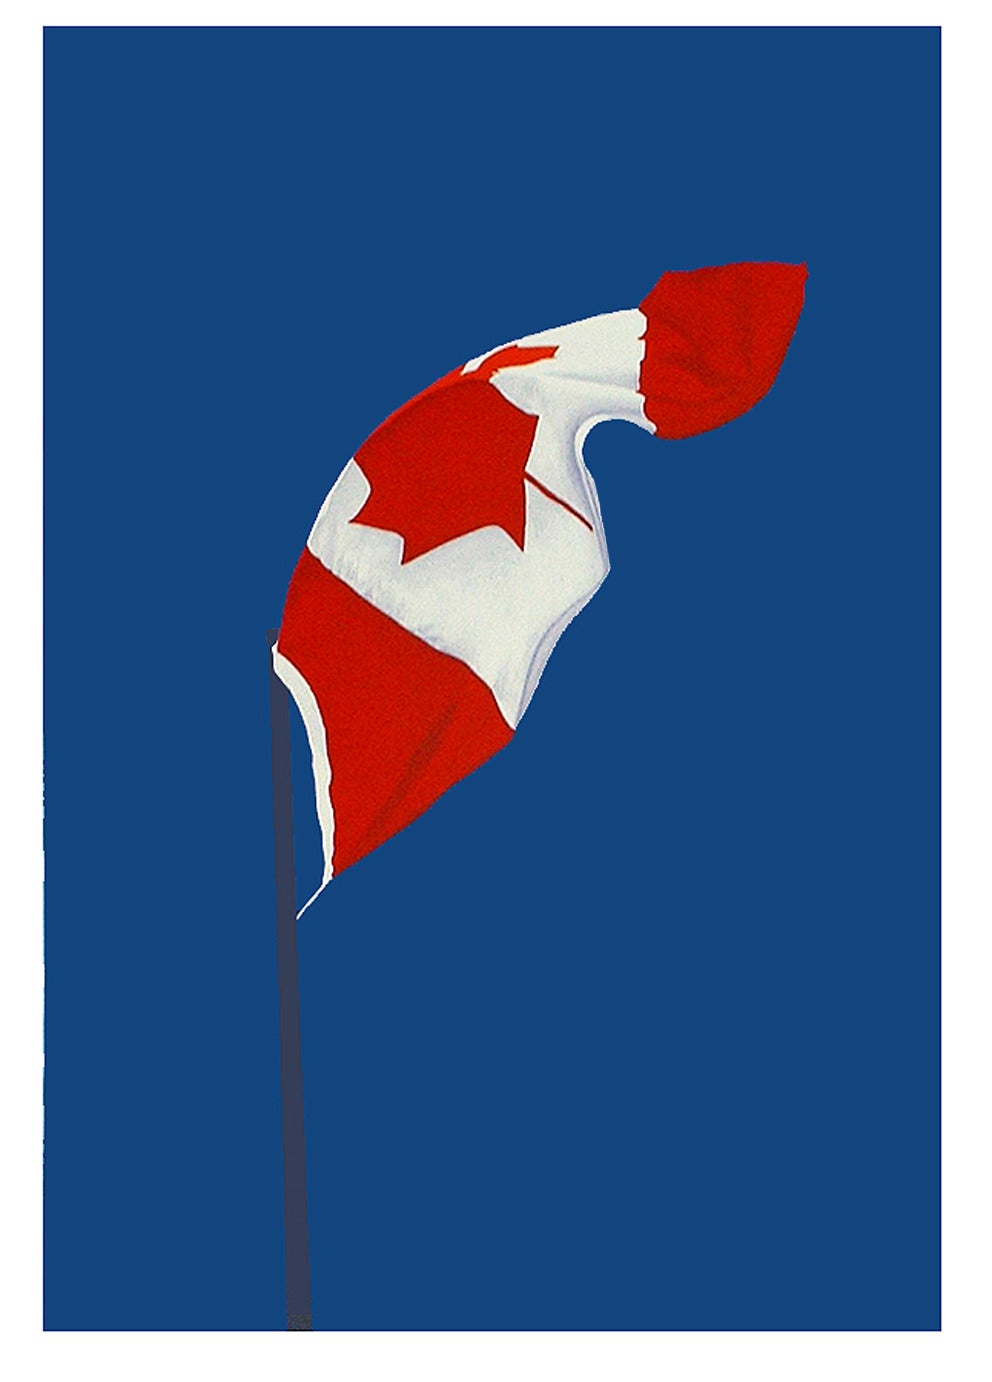 The Painted Flag 46/150 - Print by Charles Pachter